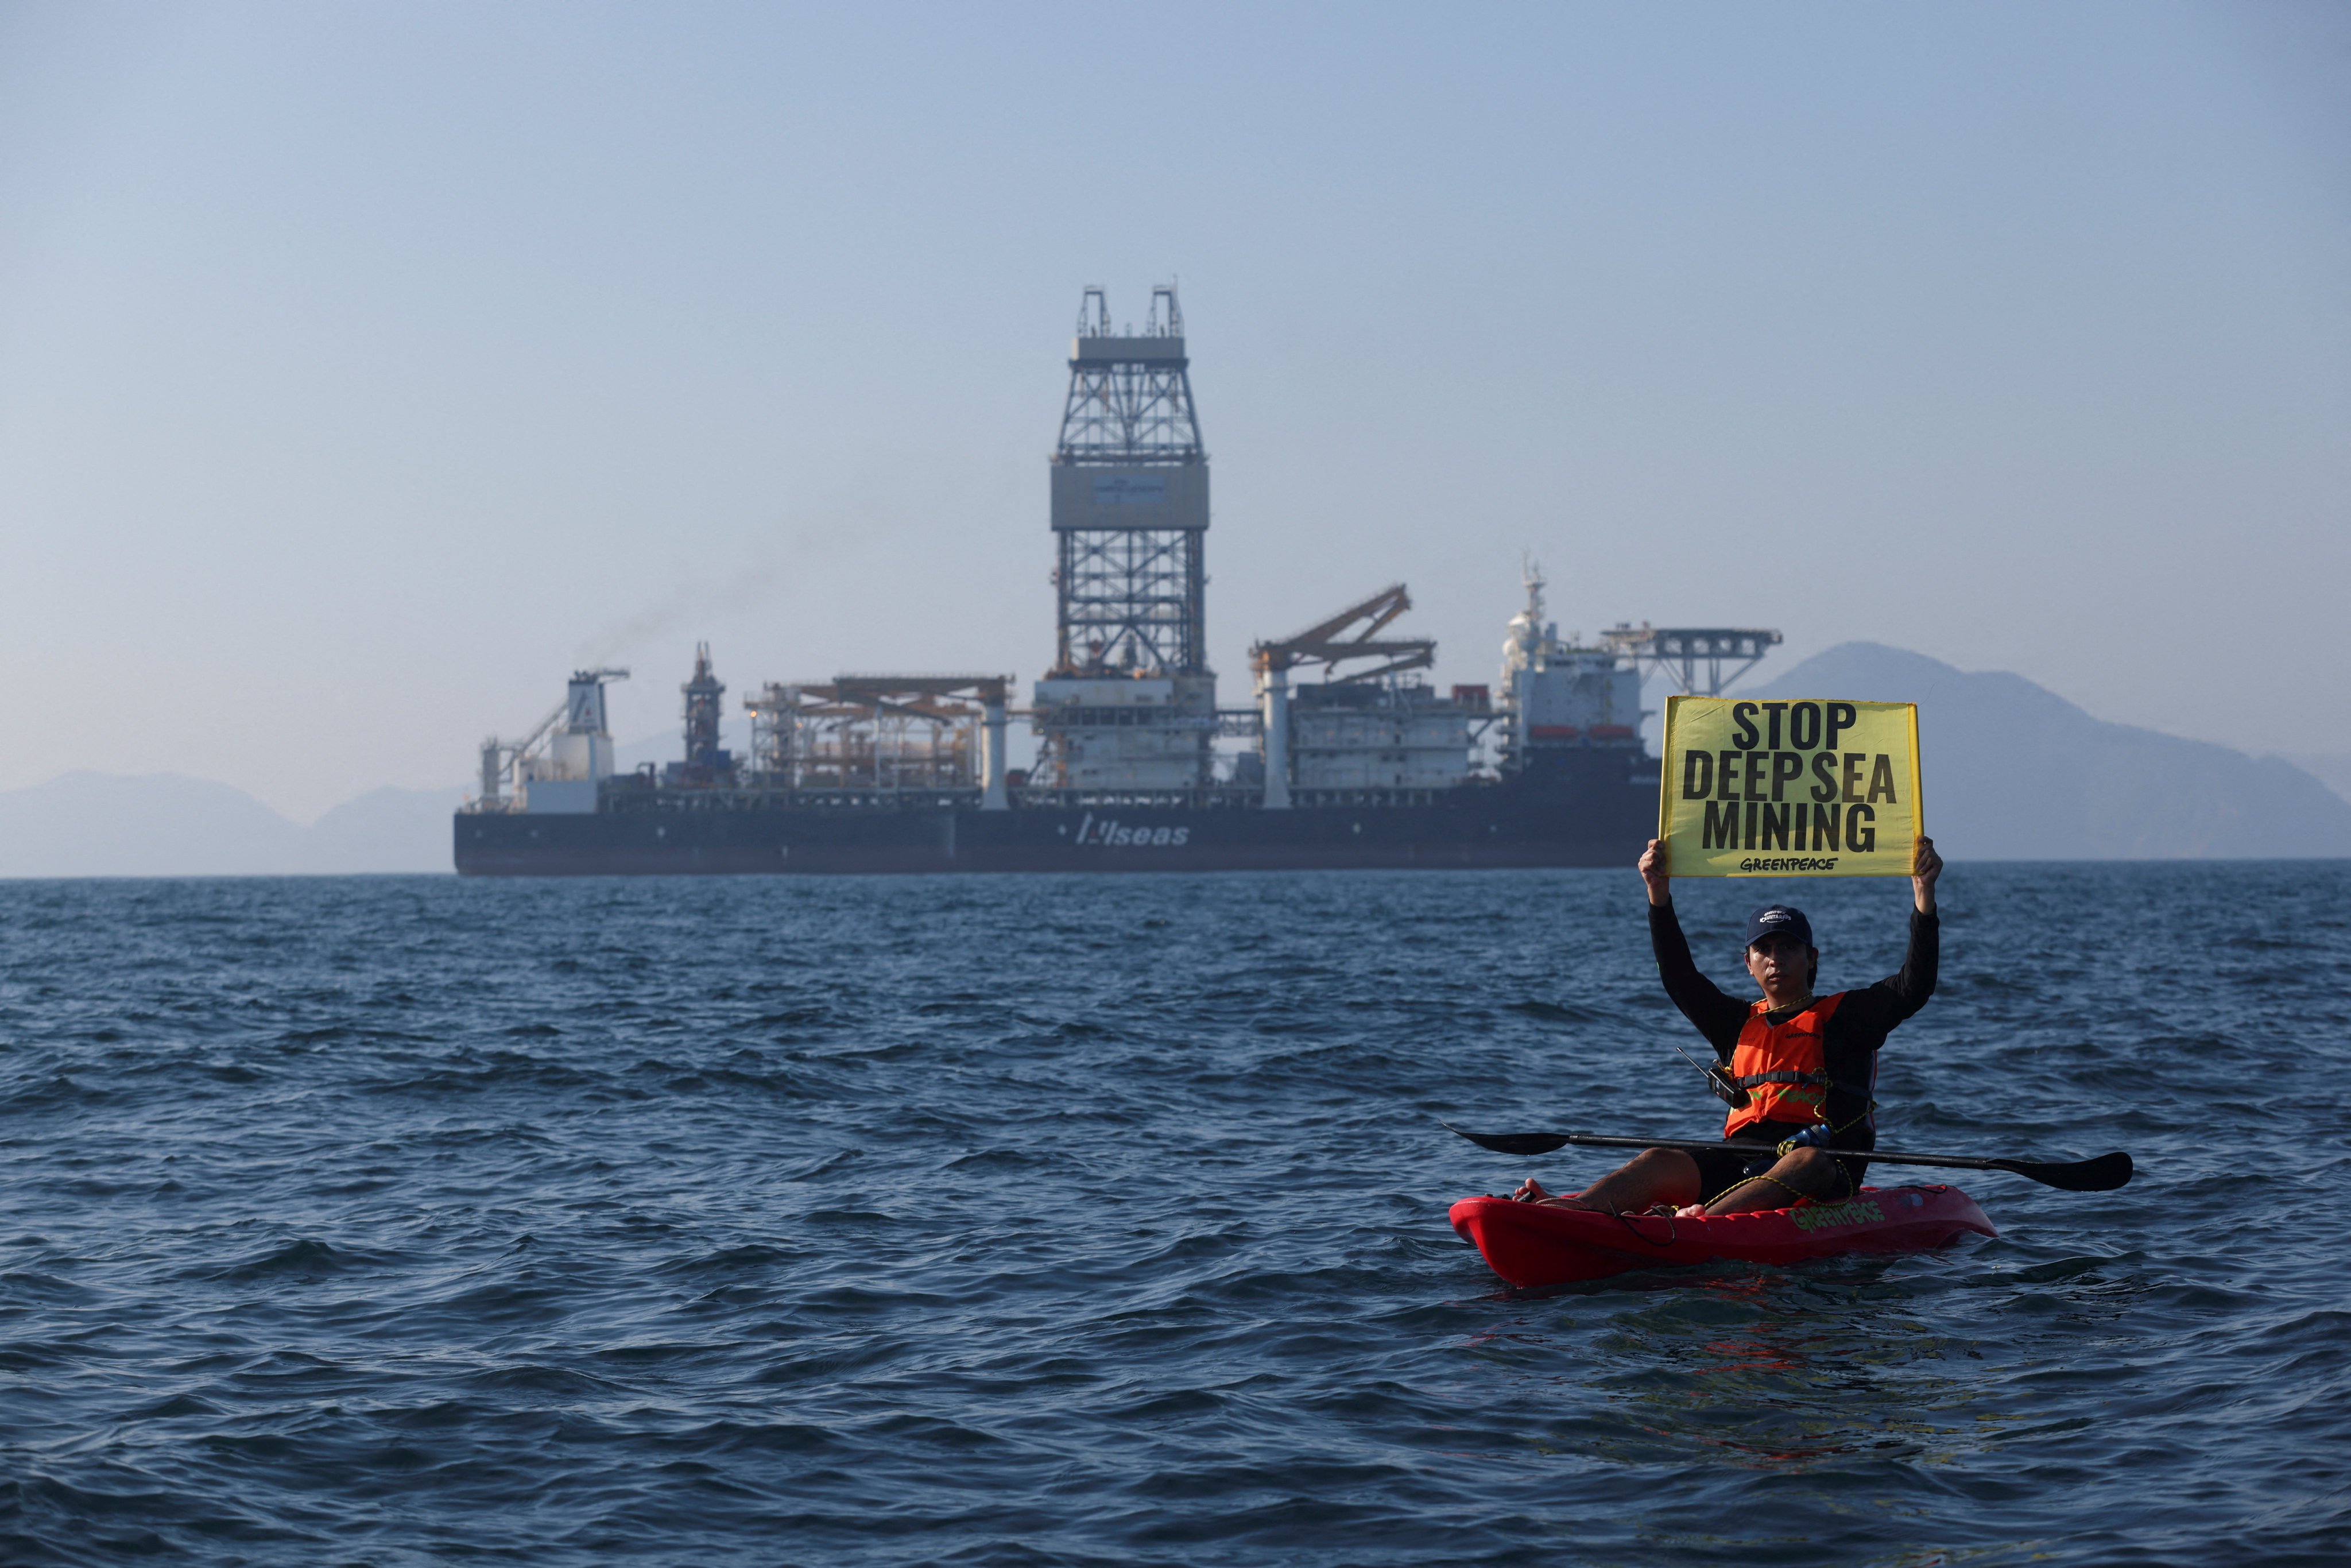 A Greenpeace activist confronts the deep sea mining vessel Hidden Gem, commissioned by Canadian miner The Metals Company, off the coast of Manzanillo, Mexico, in November 2022, as it returned to port from test mining in the Clarion-Clipperton Zone between Mexico and Hawaii. The Metals Company is among those poised to benefit from deep-sea mining projects enabled by delayed high-level negotiations. Photo: Reuters